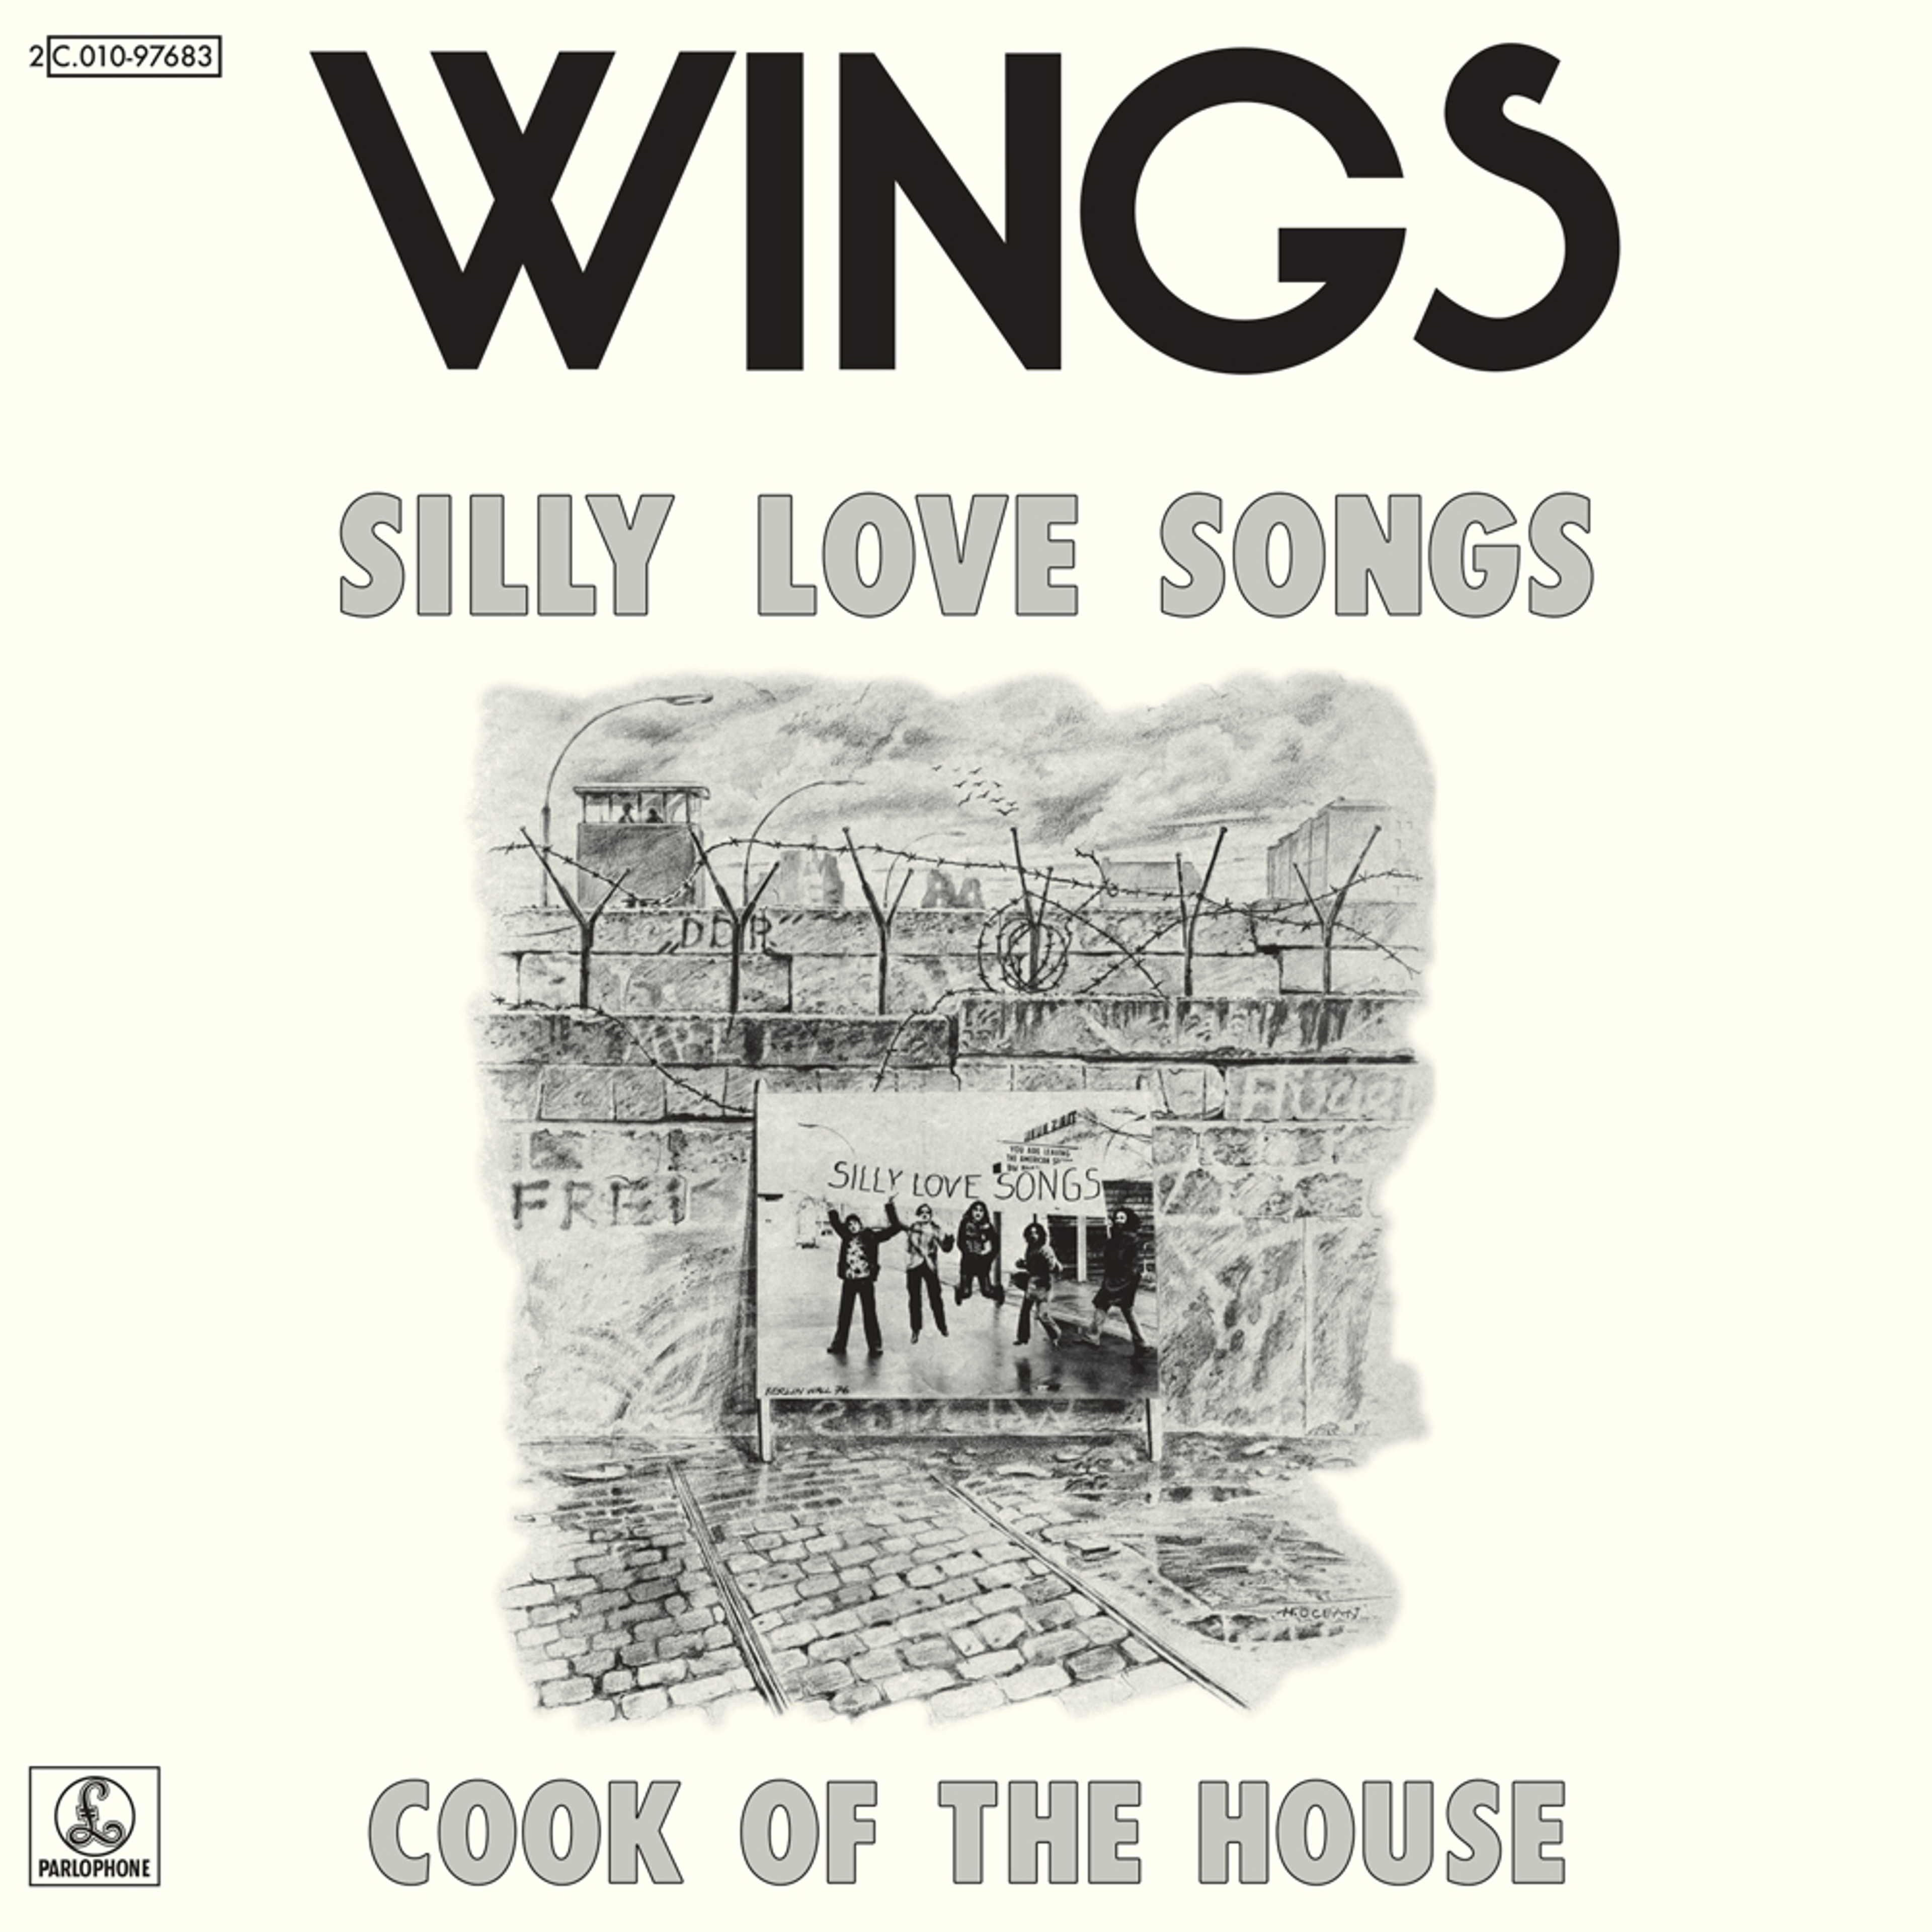 “Silly Love Songs” Single artwork as featured in 'The 7" Singles Box'